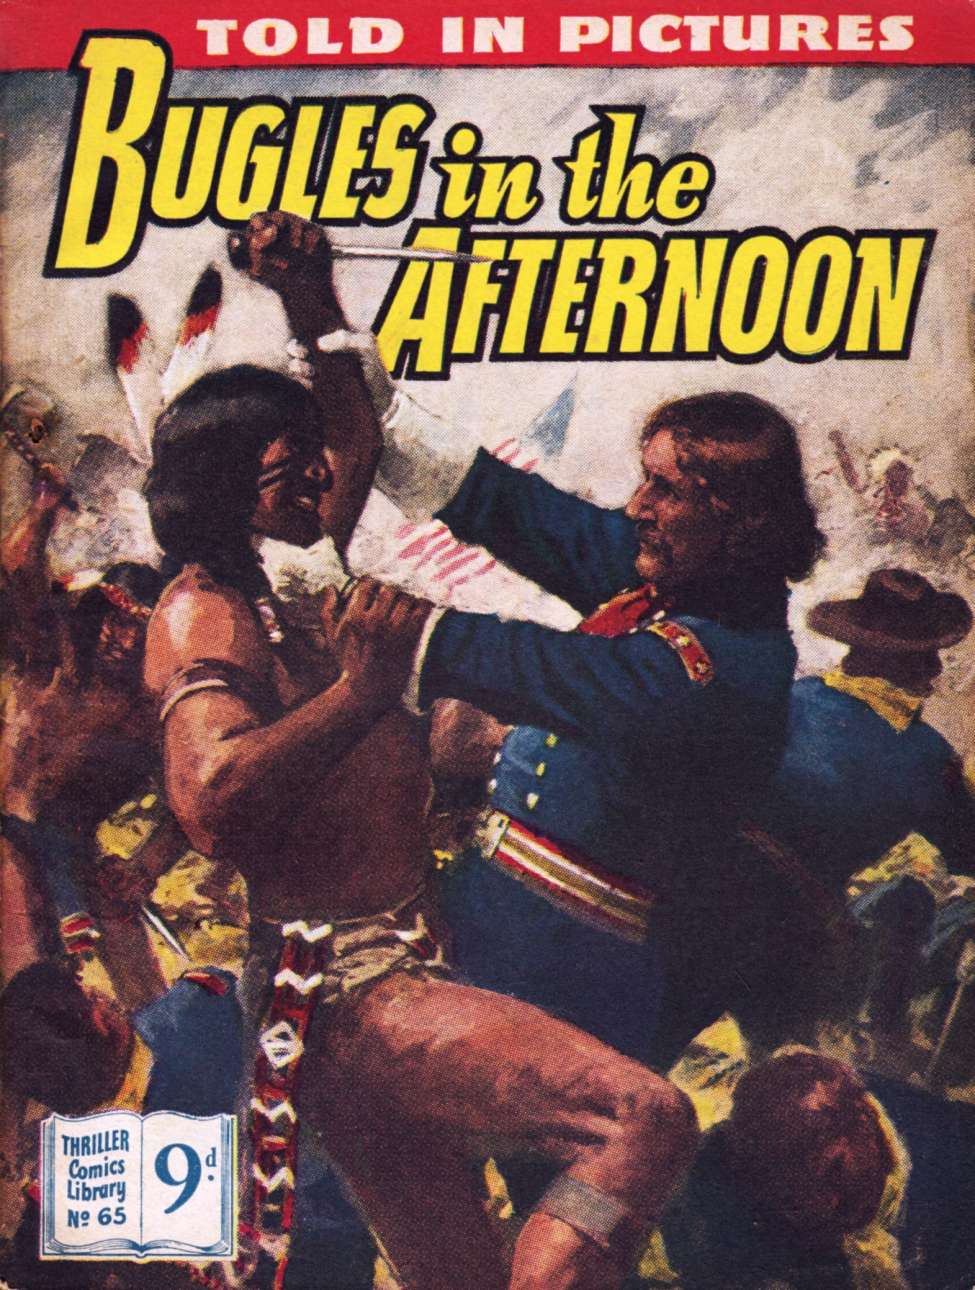 Book Cover For Thriller Comics Library 65 - Bugles in the Afternoon